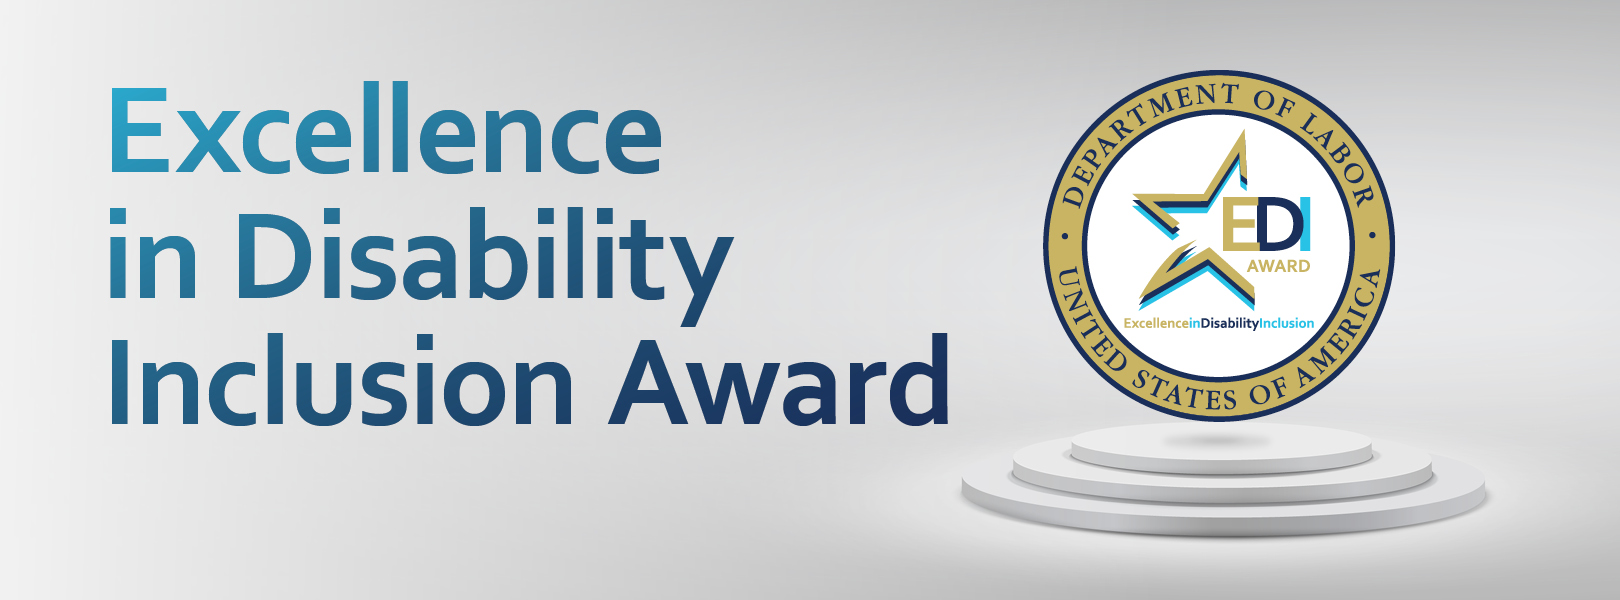 Excellence in Disability Inclusion Award